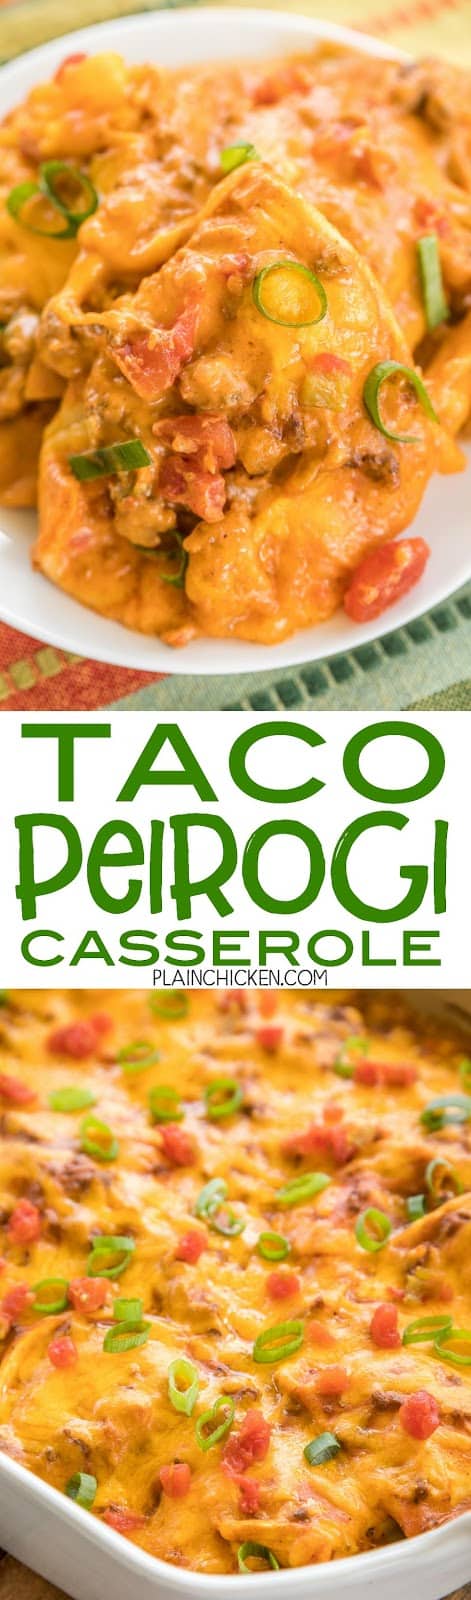 Taco Pierogi Casserole - THE BEST! We ate this two days in a row! Ready in 30 minutes!! Taco meat, velveeta, salsa, cheese pierogies, cream of chicken soup and cheddar cheese. CRAZY good! Everyone cleaned their plates - even our picky eaters! Our favorite Mexican casserole!